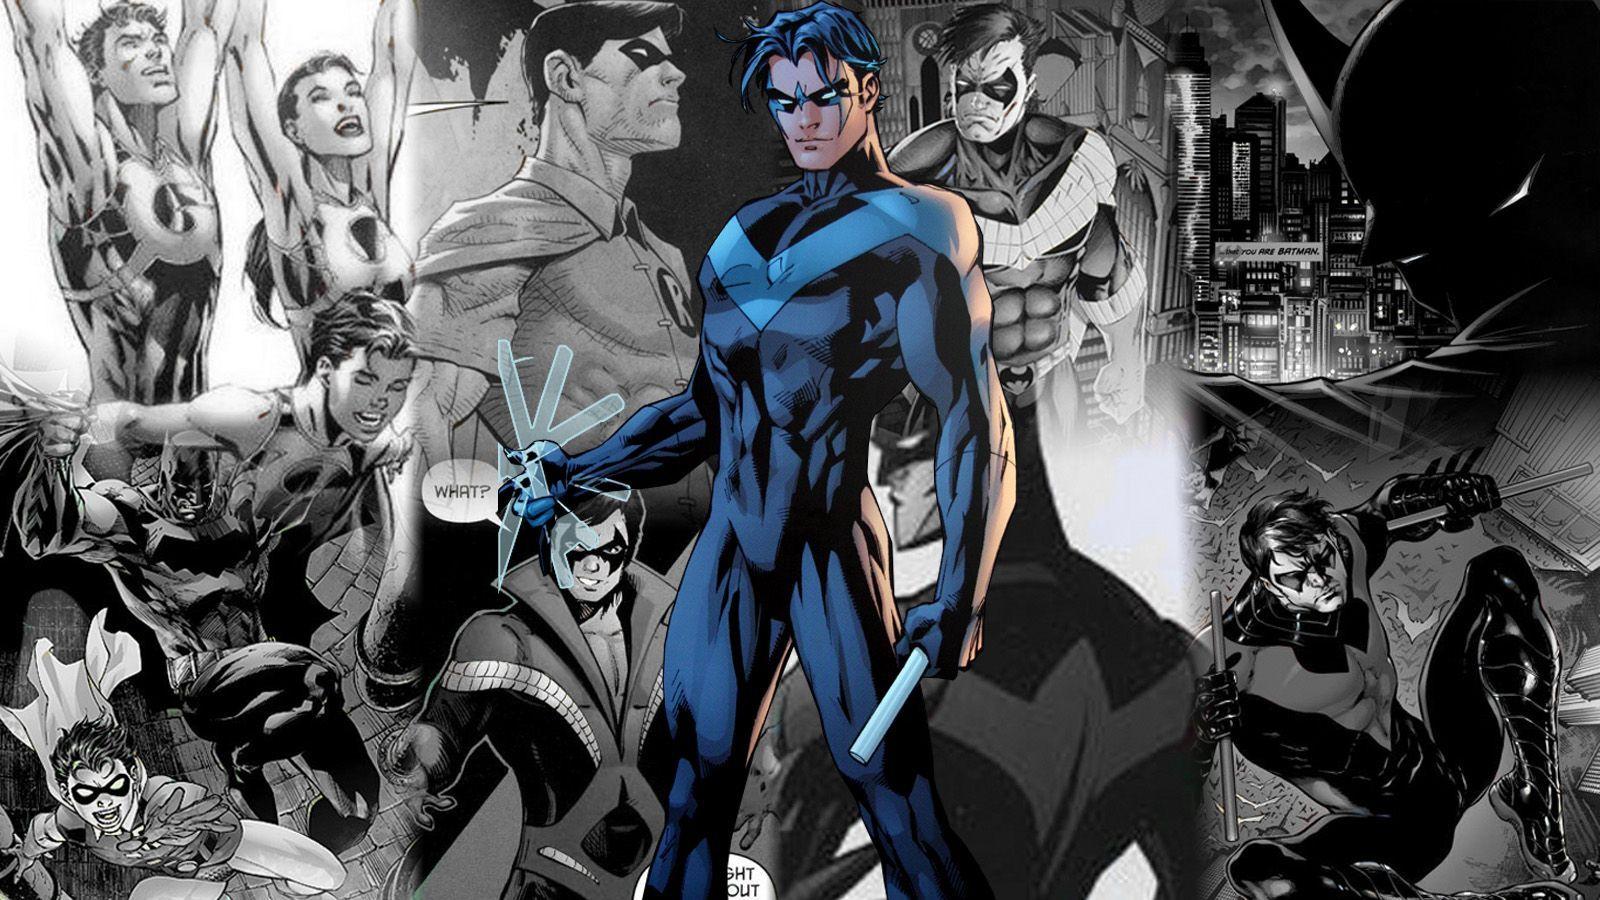 Dick Grayson screenshots, image and picture Vine